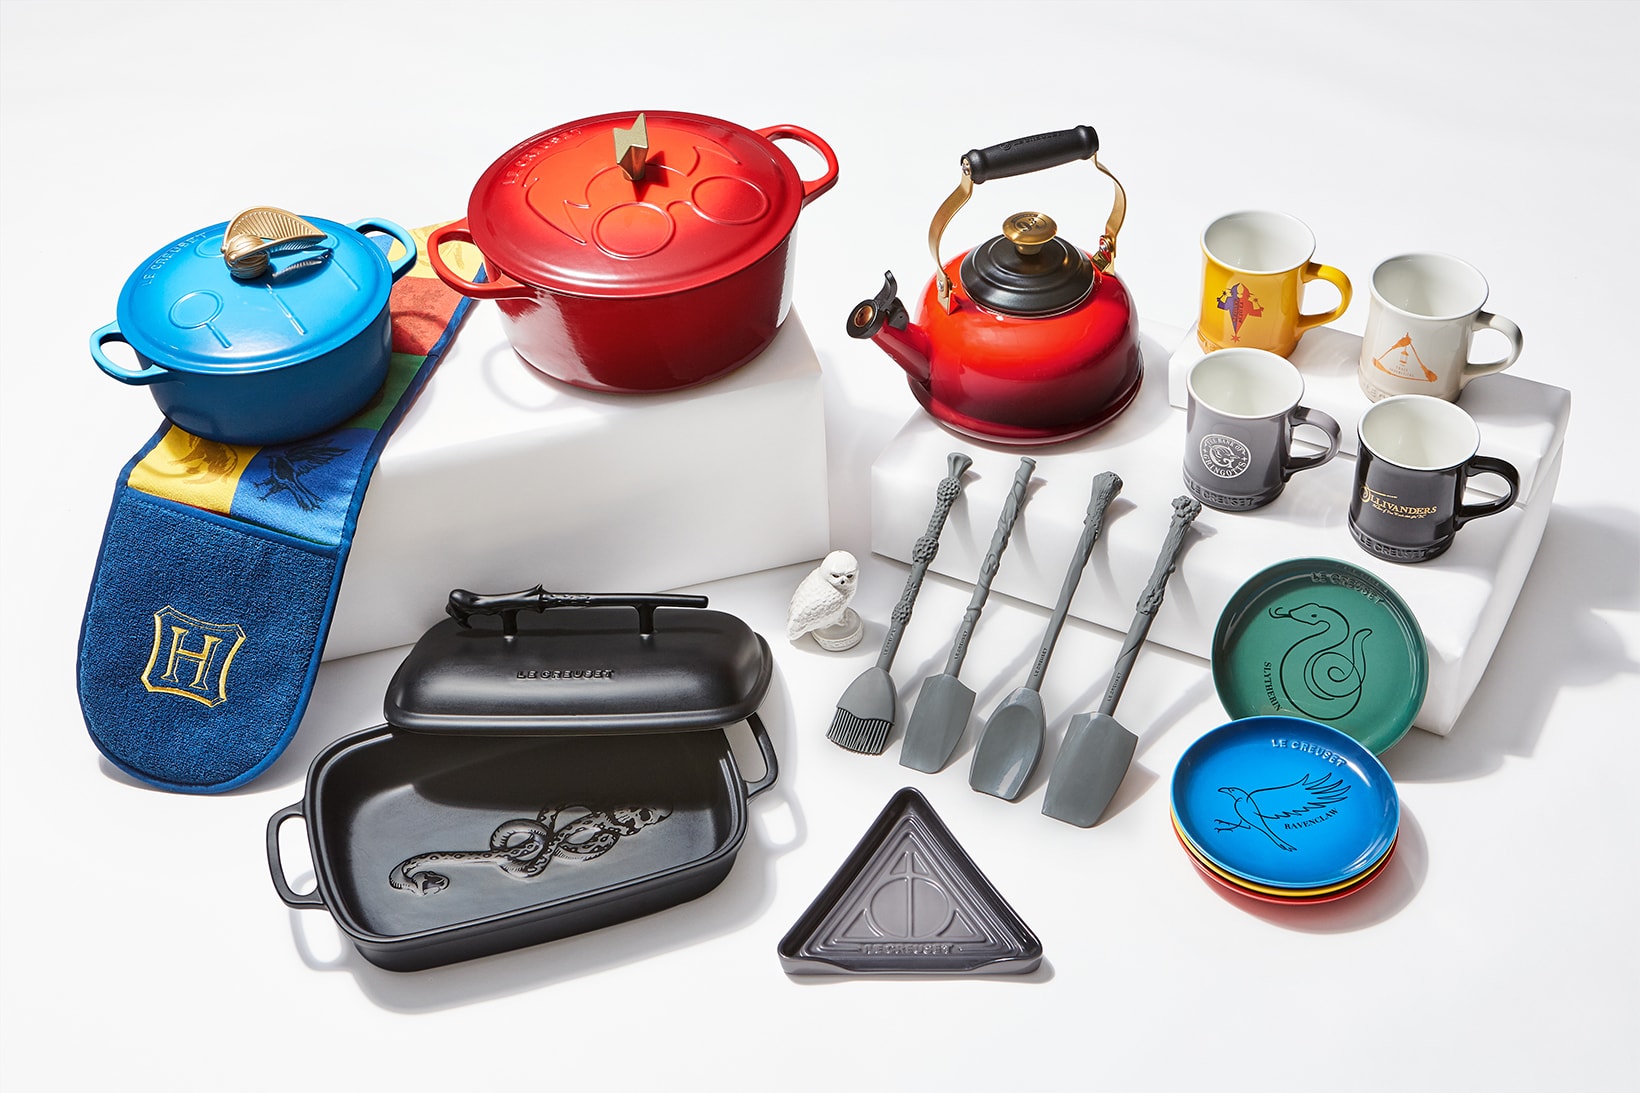 Le Creuset Launched New Fall-Themed Cookware